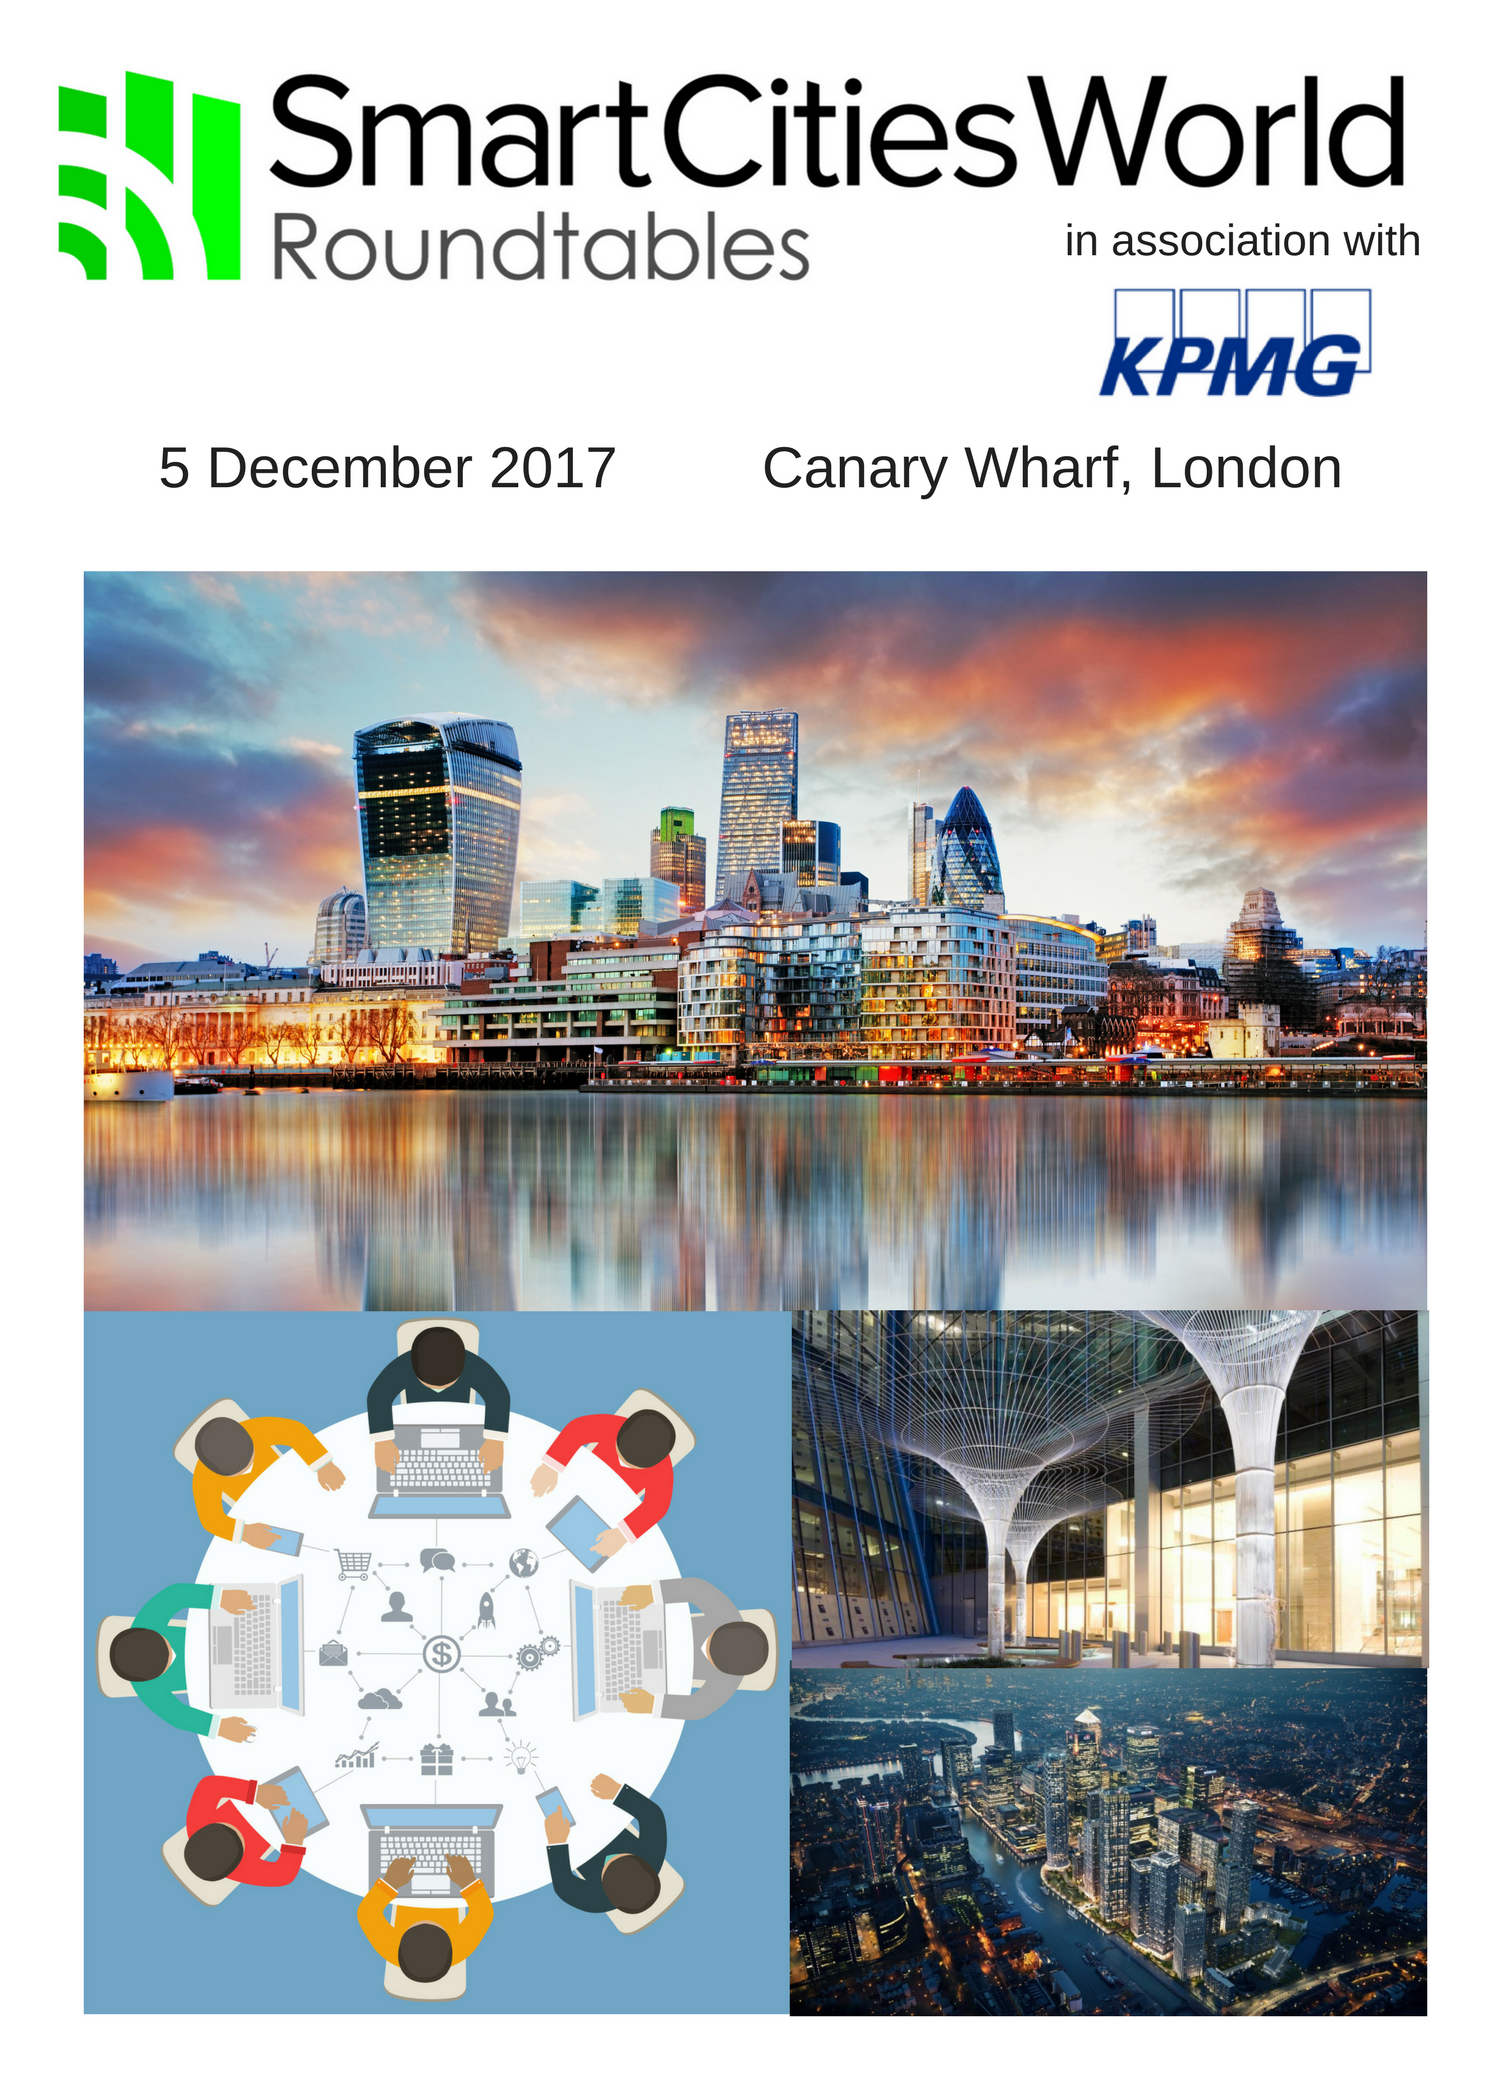 Smart Infrastructure Round Table Discussions - 5 December 2017